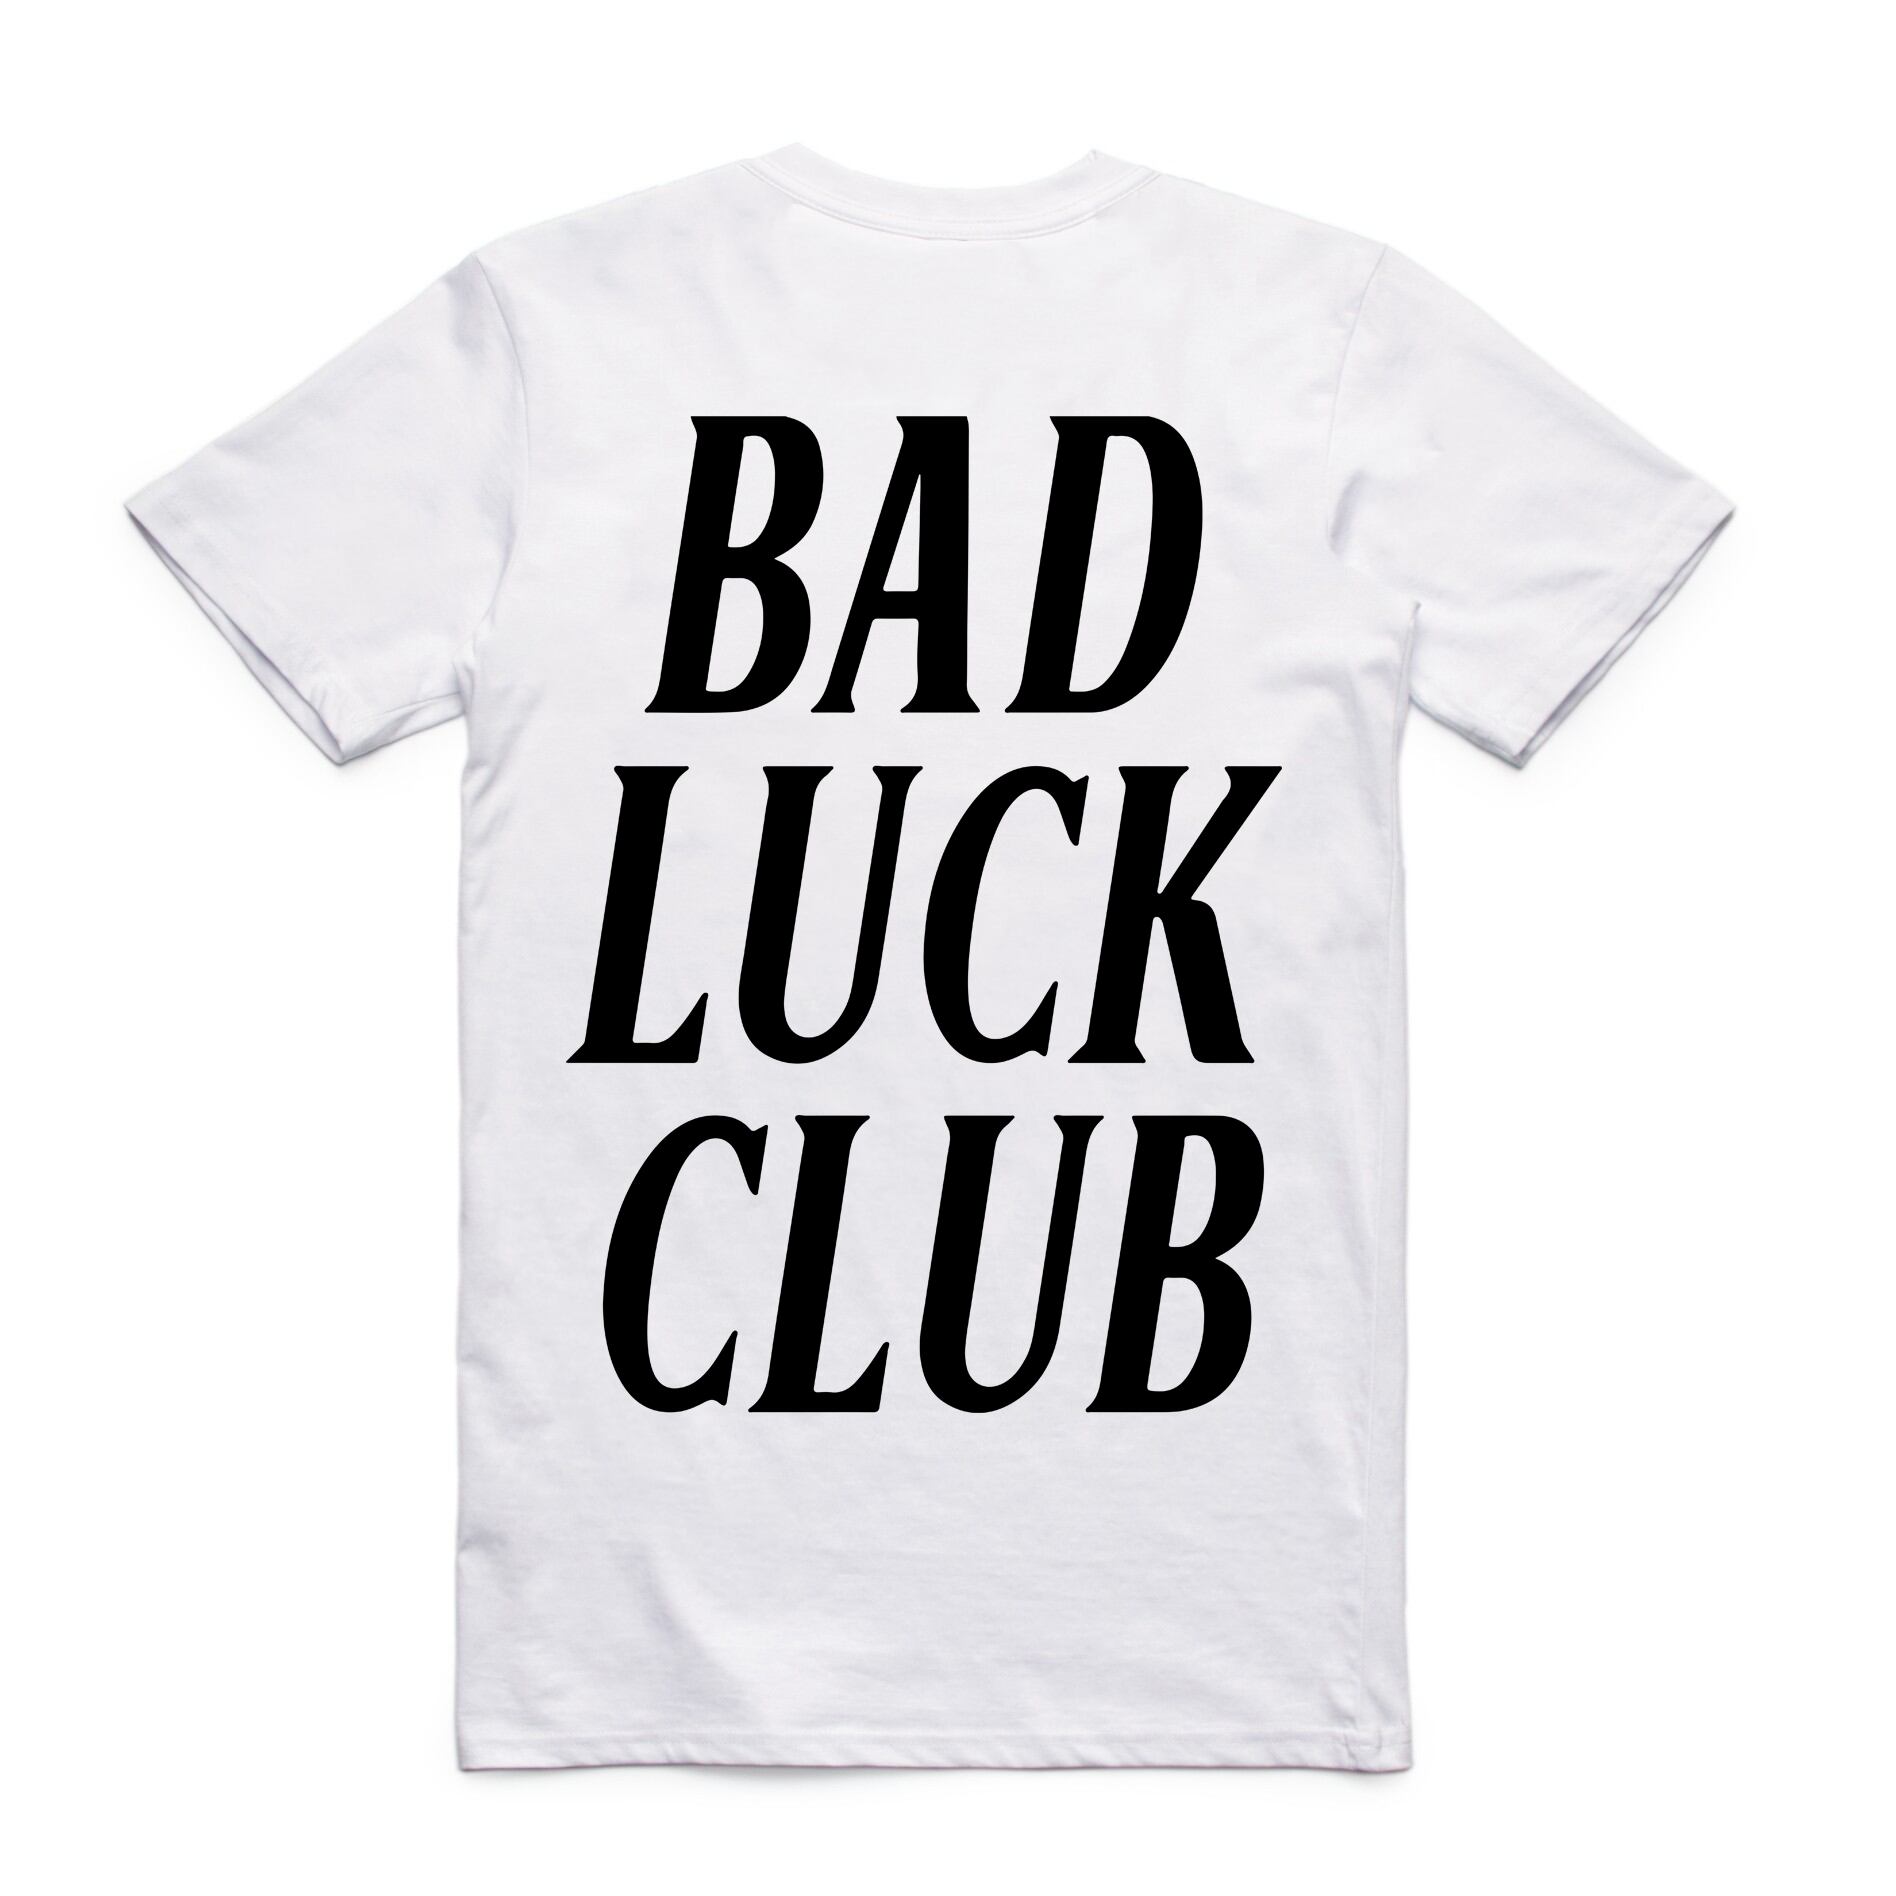 NEVER CONTENT　BAD LUCK CLUB Tシャツ ホワイト